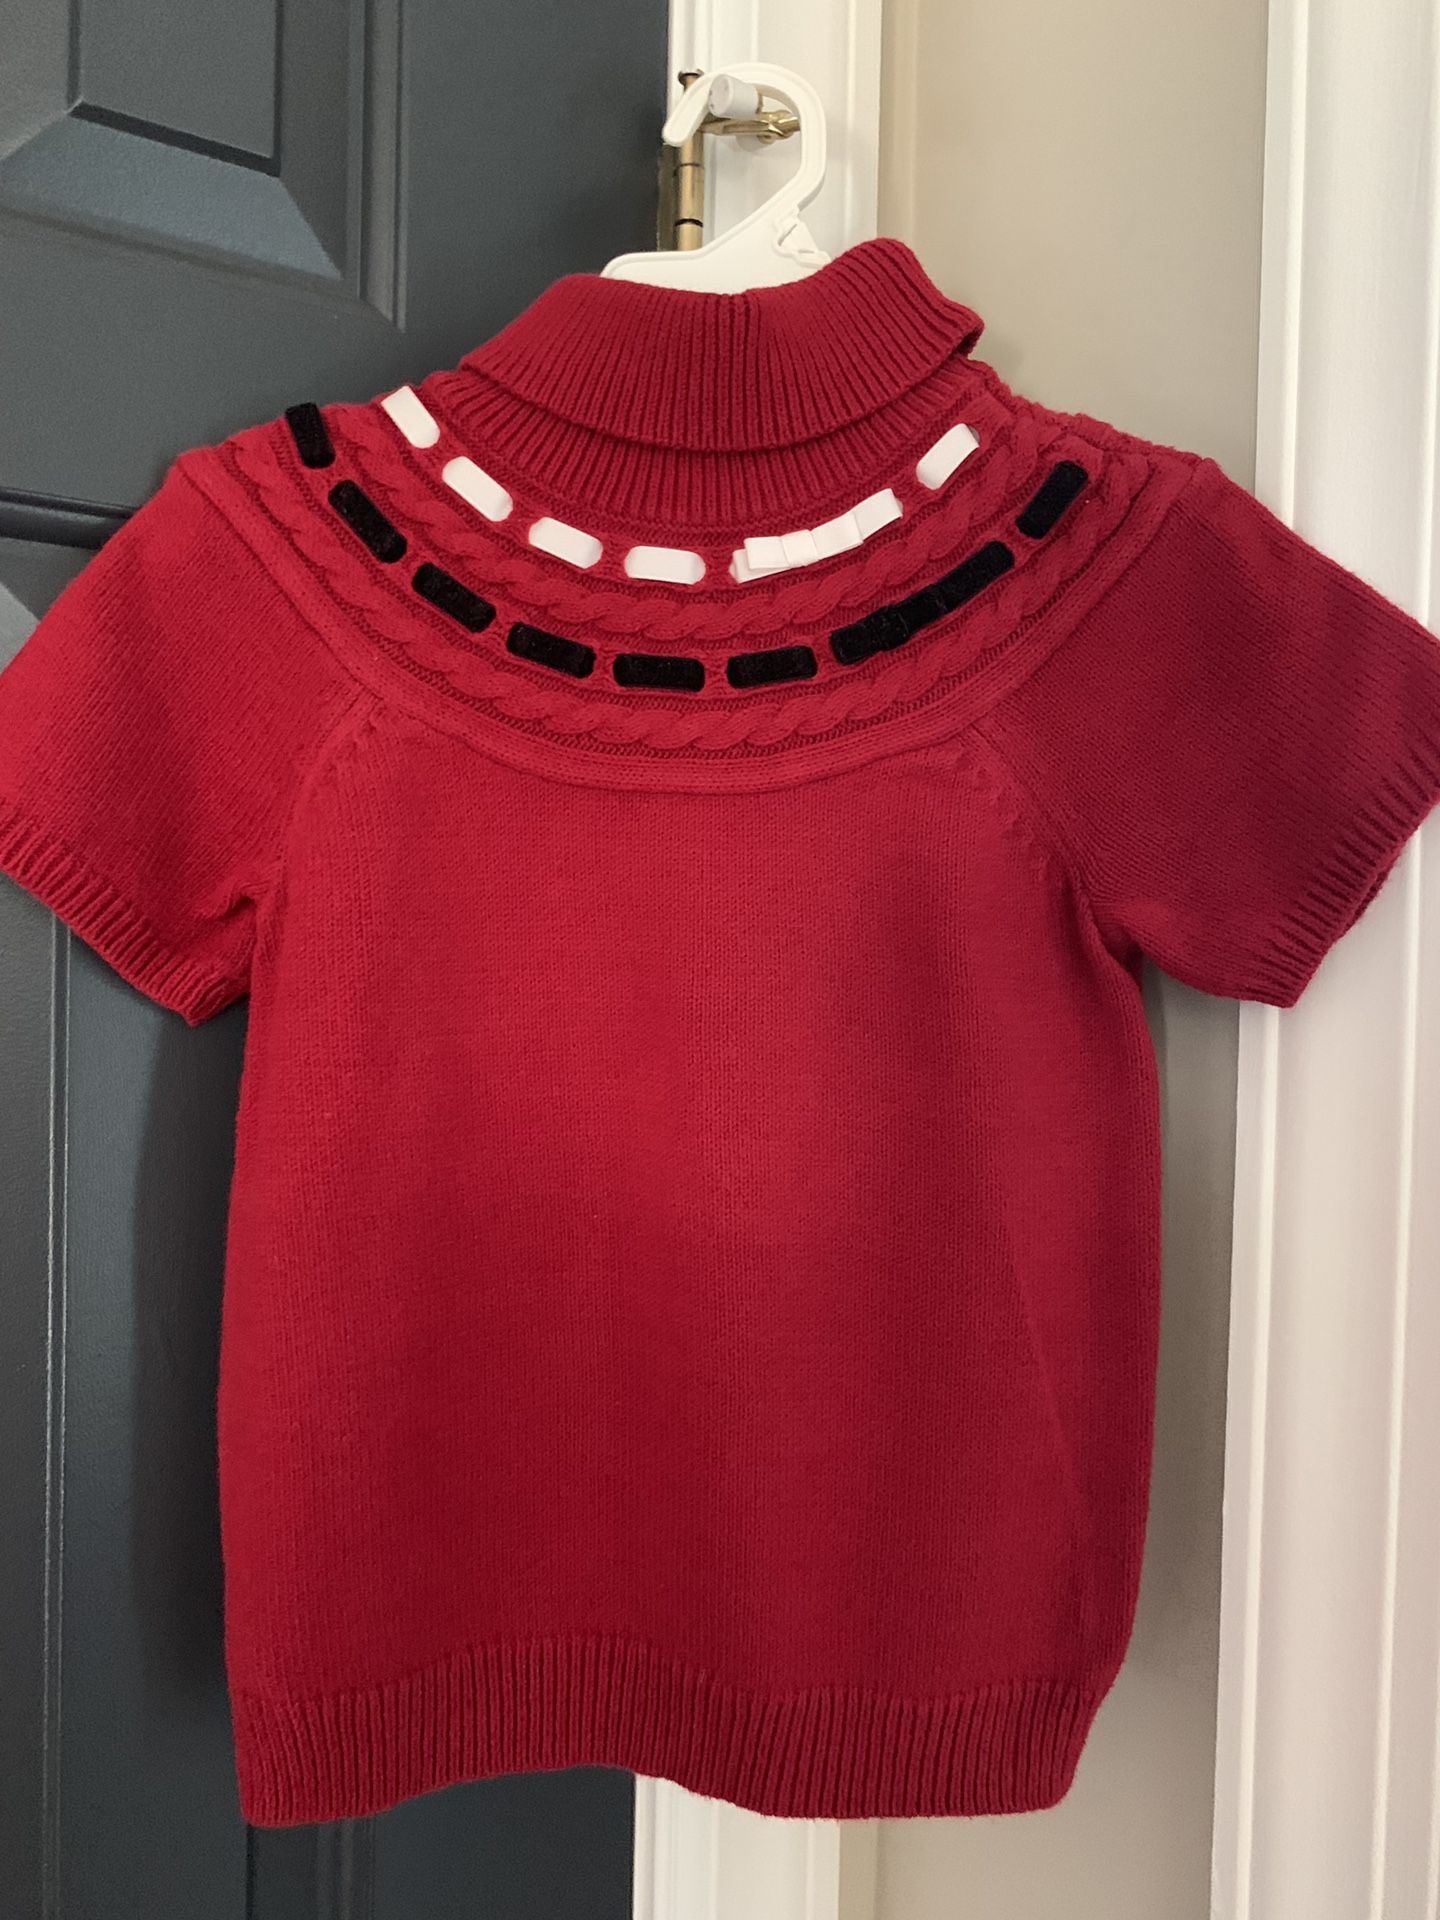 Girl size 7/8 red ribbon sweater